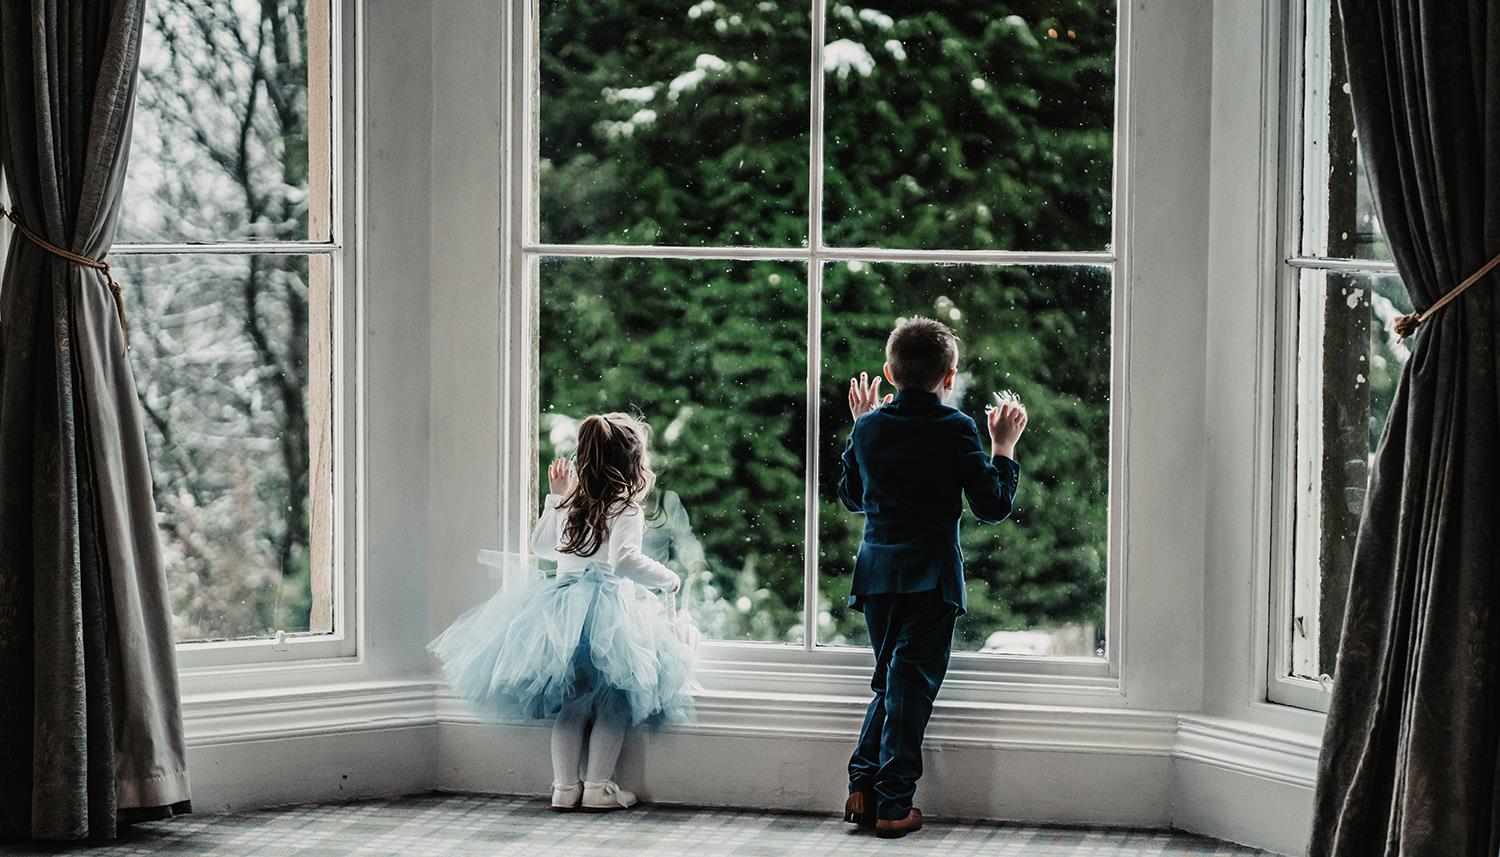 Flower girl and boy watching the snow through the window. Photo Credit: Willow & Wilde Photography